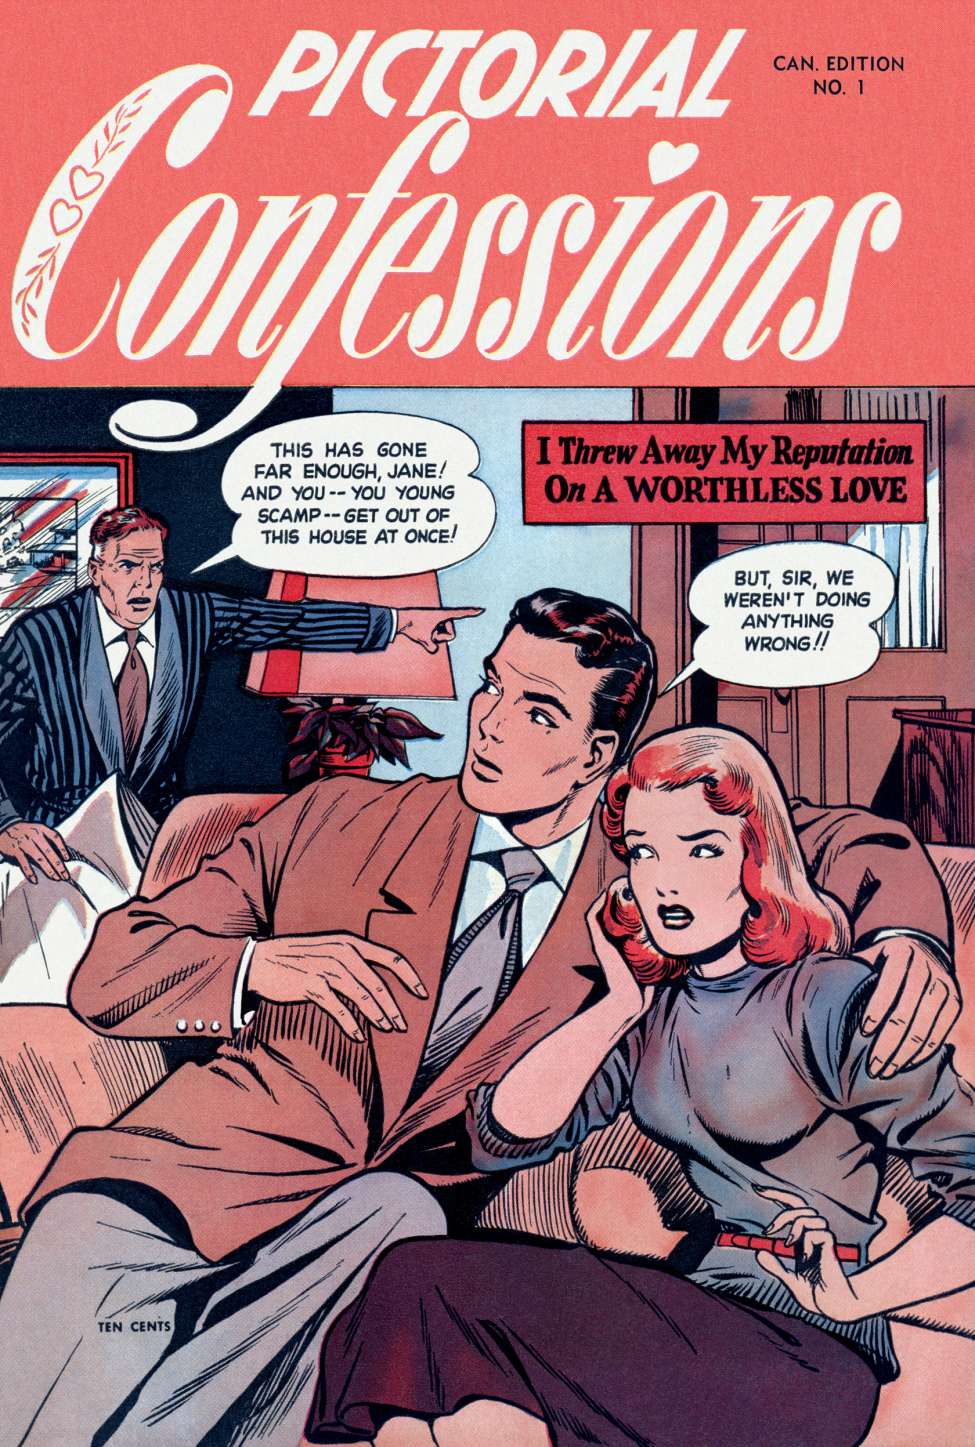 Book Cover For Pictorial Confessions 1